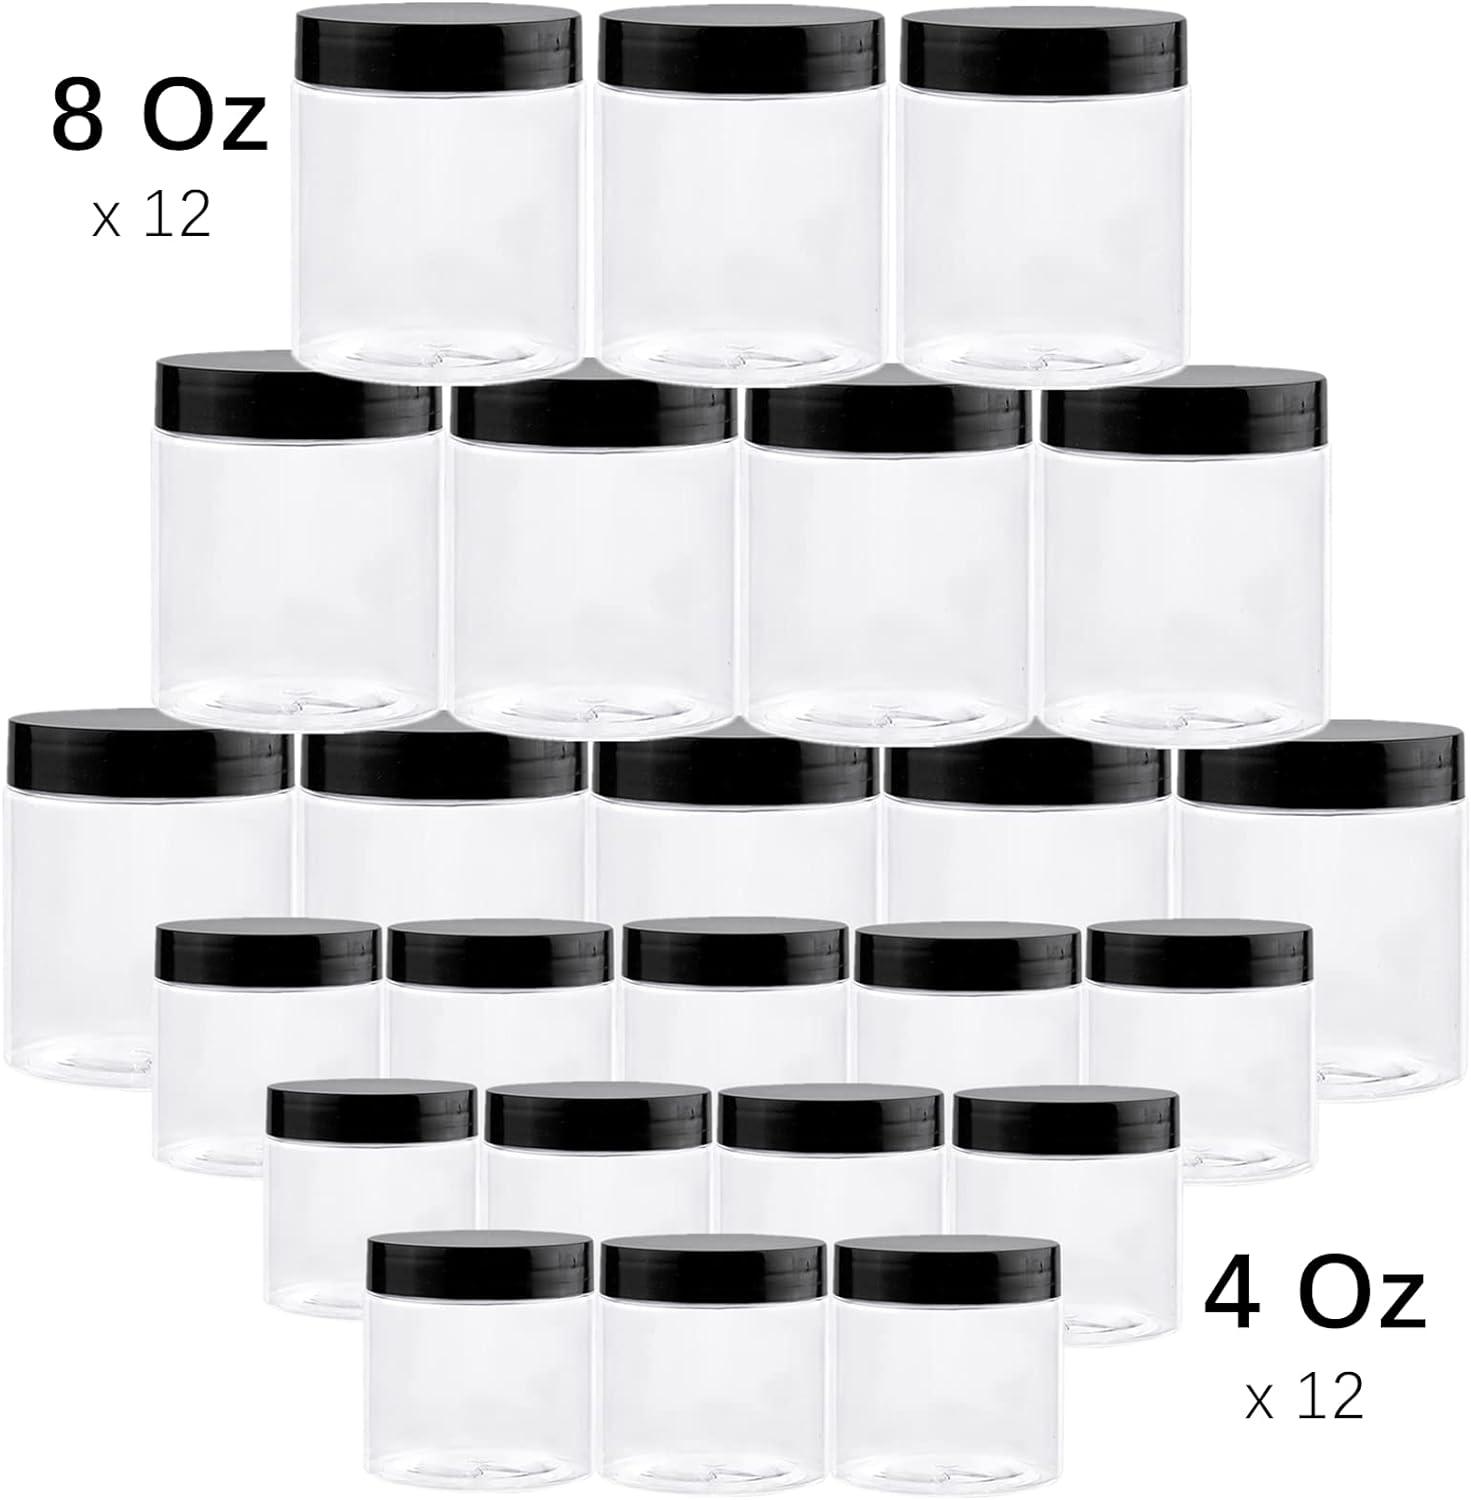  36 Pack 4 Oz Plastic Container Jars with Lids and Labels BPA  Free, TUZAZO Empty Round Clear Cosmetic Containers Plastic Slime Jars for  Lotion, Cream, Ointments, Body Butter, Makeup, Travel Storage (